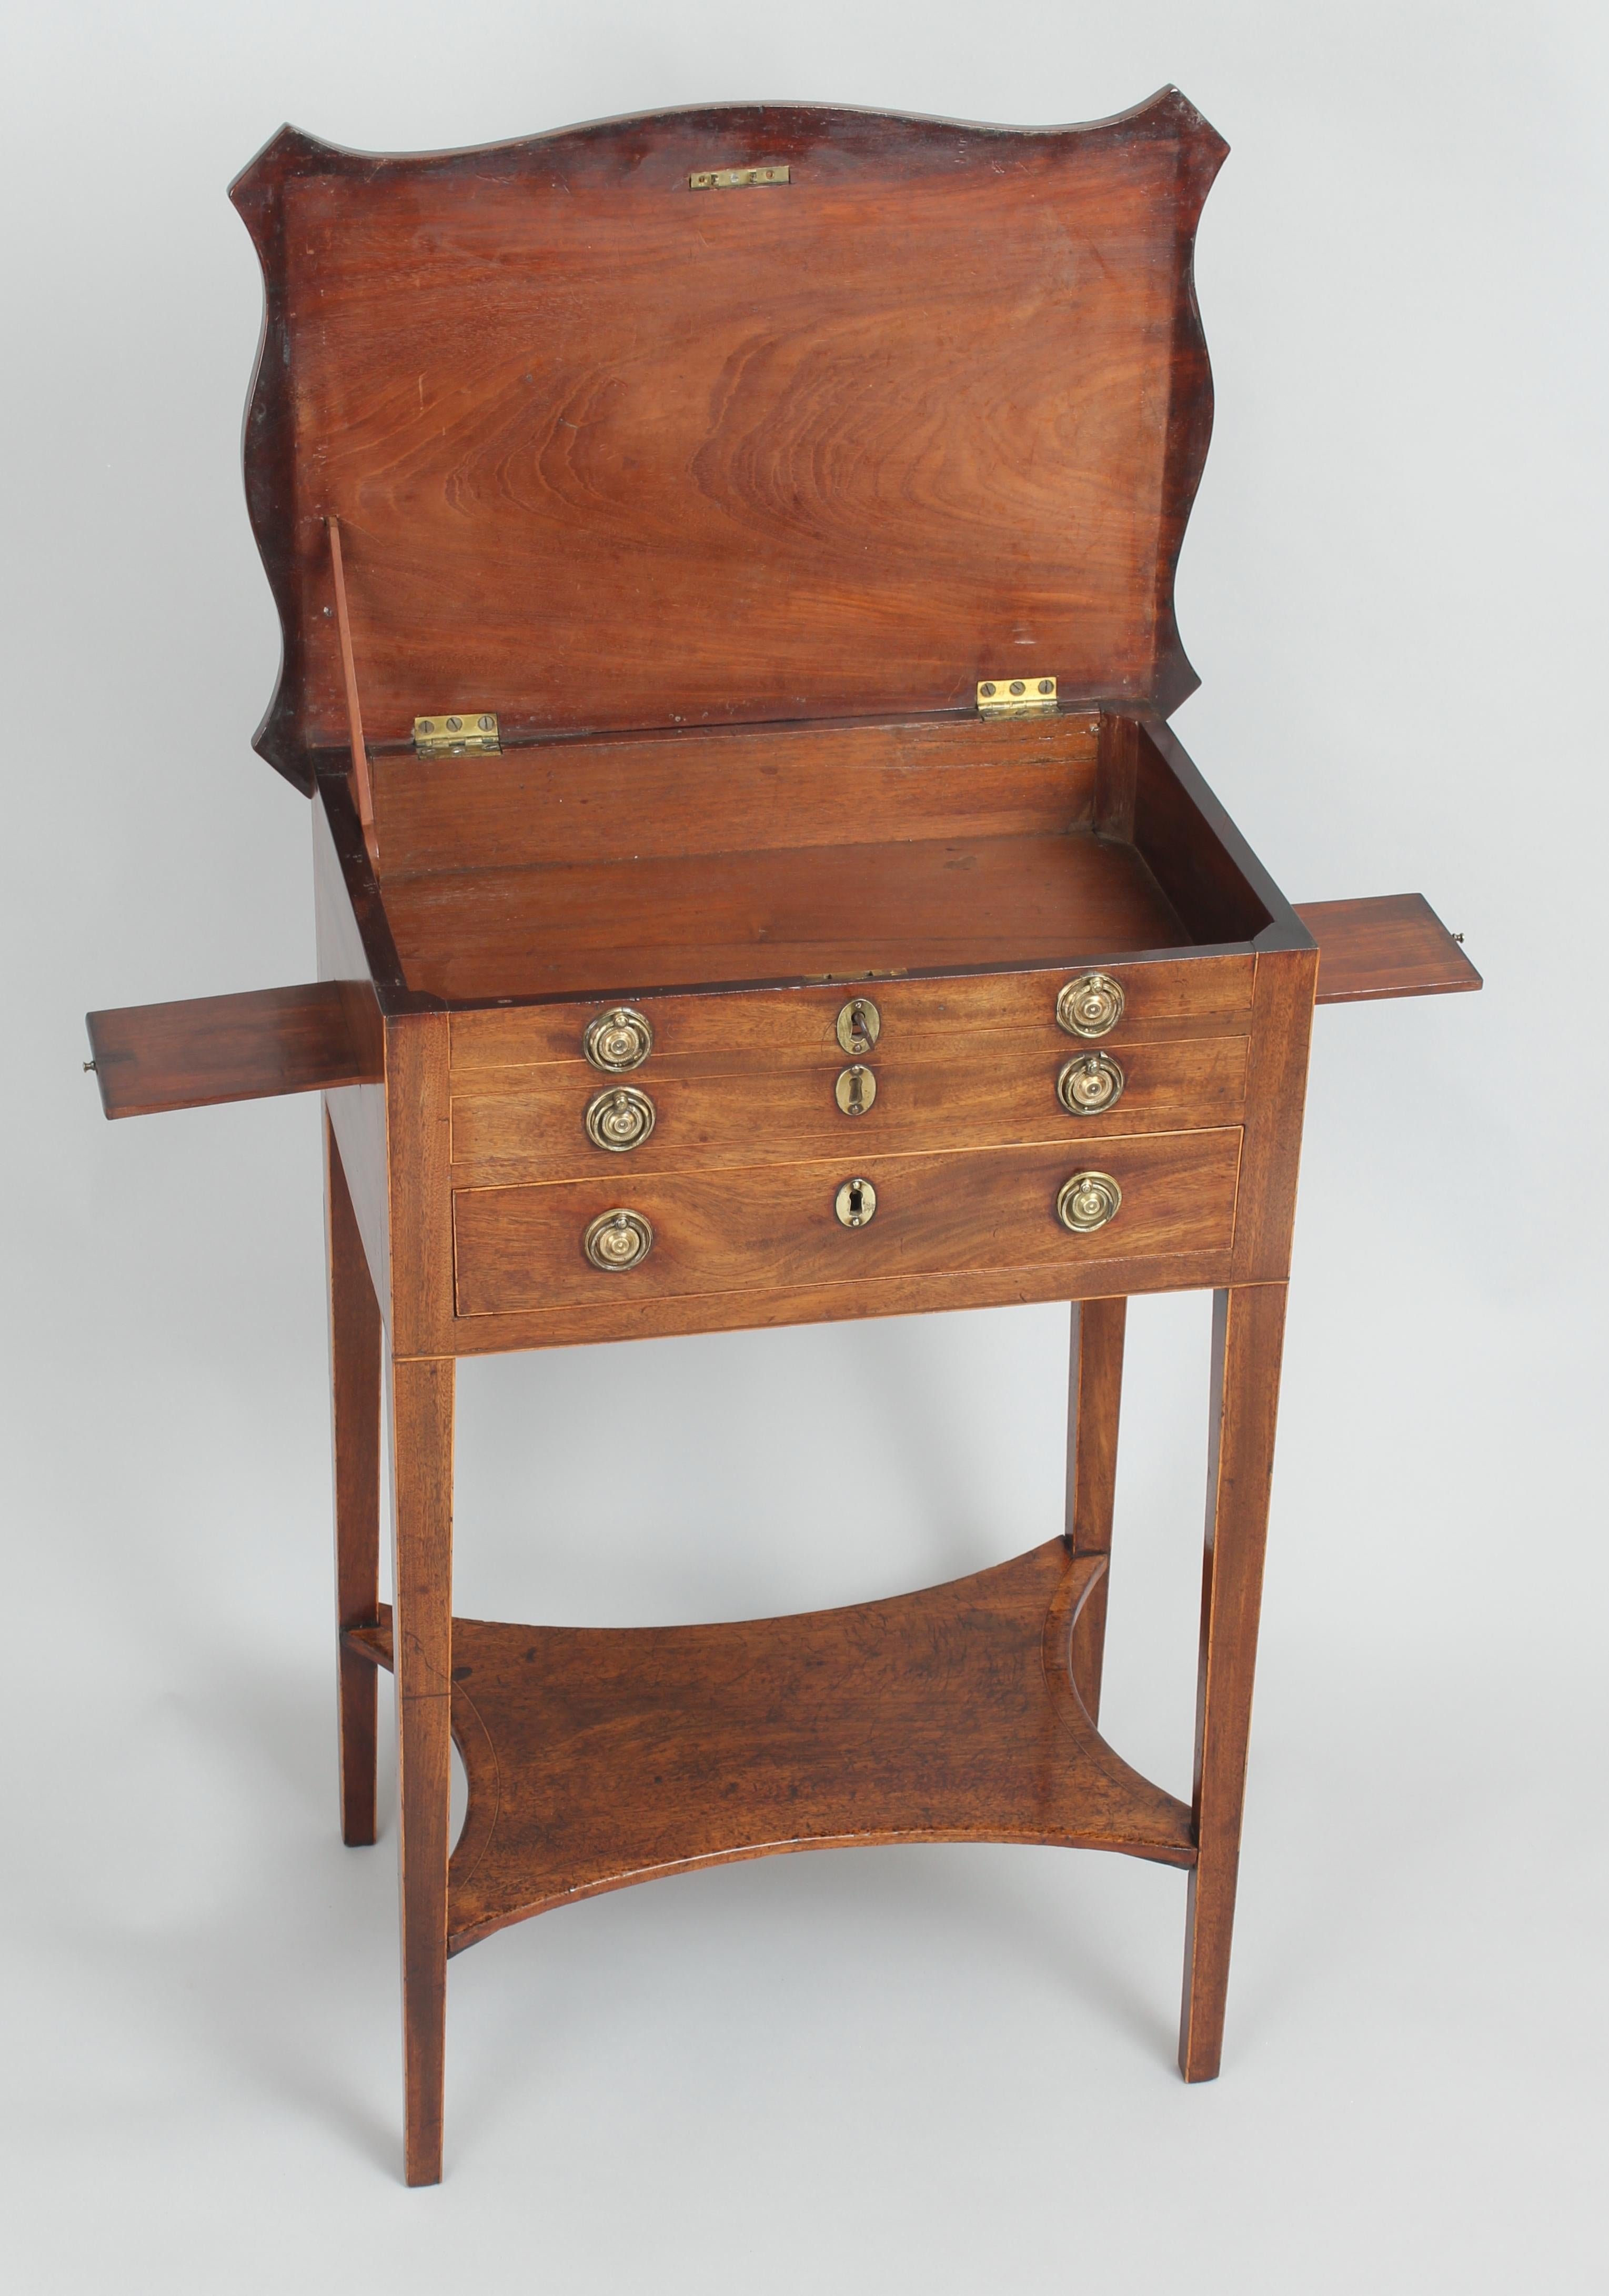 George III period mahogany worktable; the overhanging serpentine hinged top with a kingwood cross-banded border, enclosing a compartment behind two dummy-drawers, above a drawer with six adjustable dividers; the sides fitted with two small slides